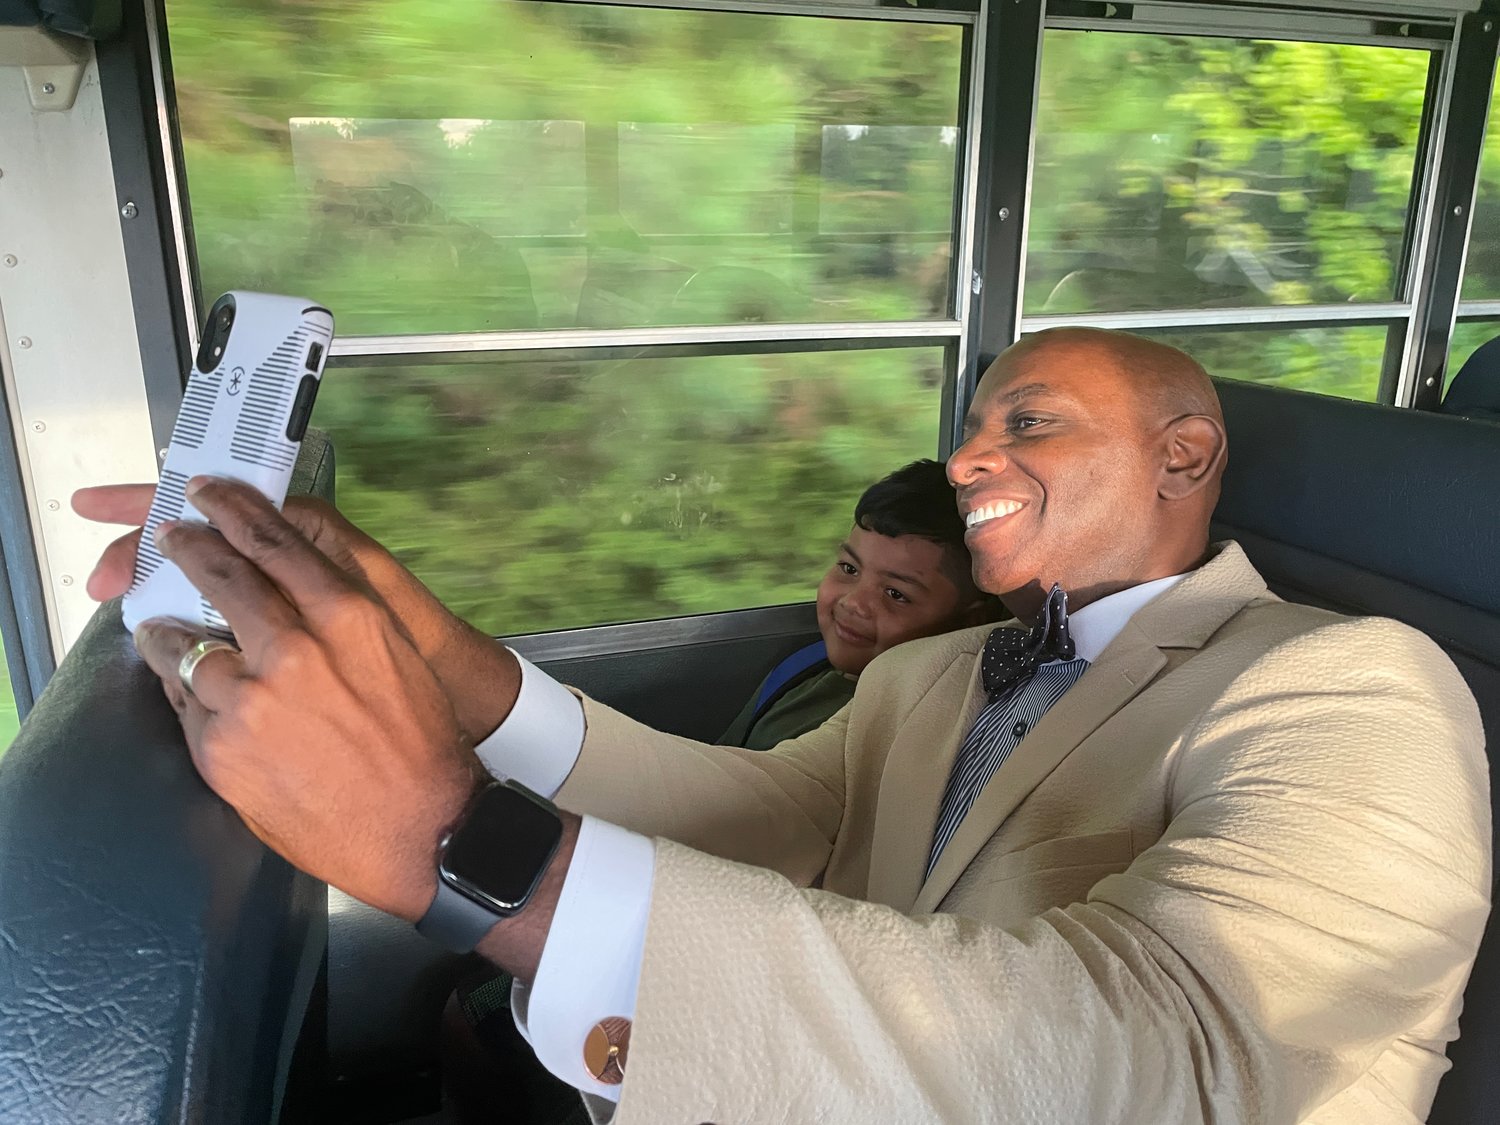 On his way to Virginia Cross Elementary School, Superintendent Dr. Anthony Jackson takes a selfie on the bus with kindergartener Seth Burnette.